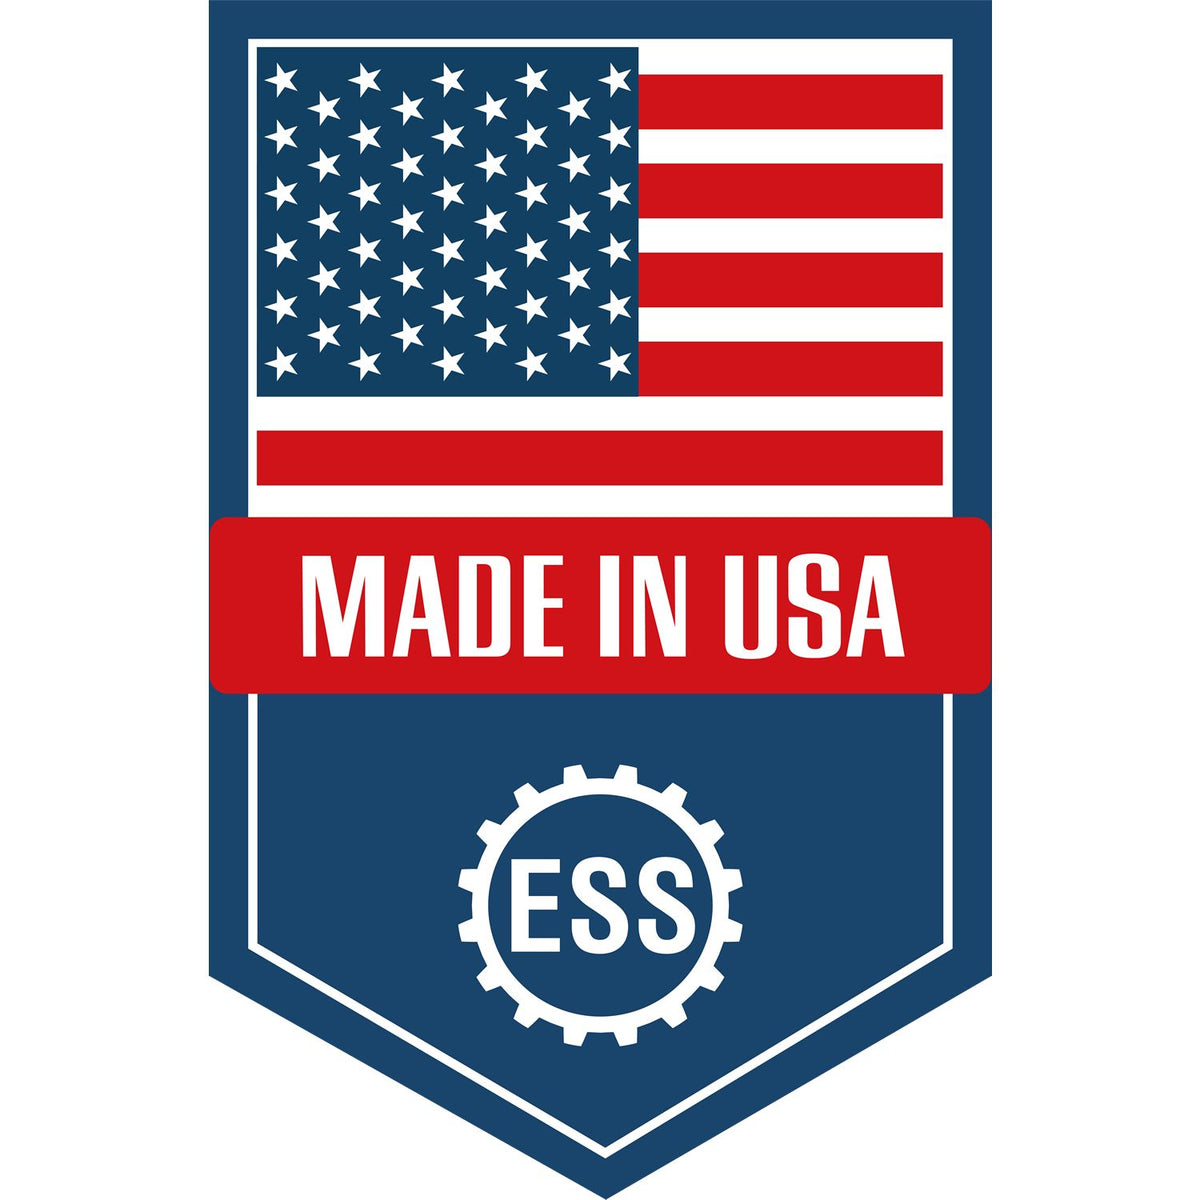 An icon or graphic with an american flag and text reading Made in USA for the Slim Pre-Inked Nebraska Landscape Architect Seal Stamp